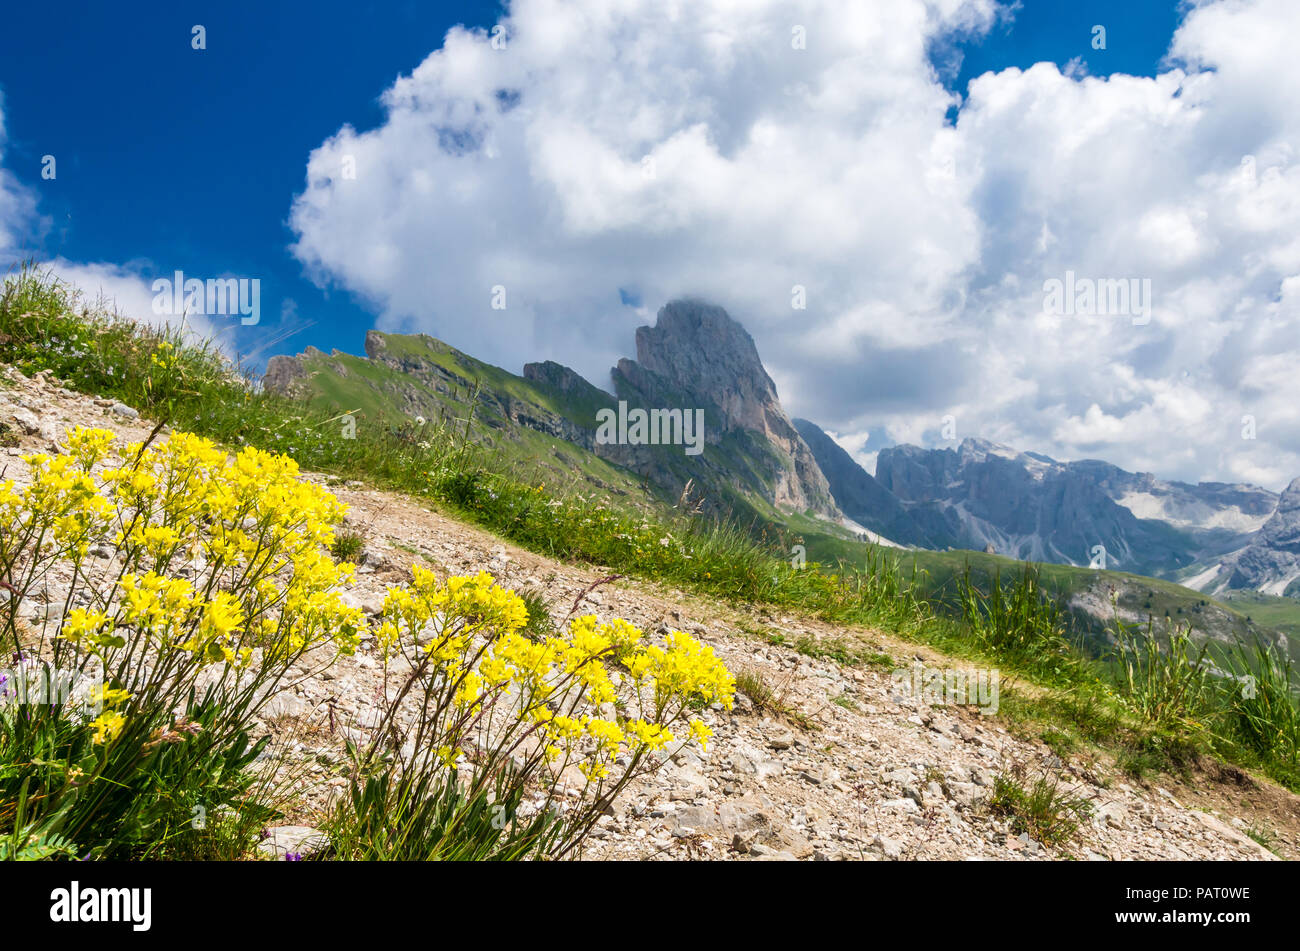 Gruppo delle Odle, view from Seceda. Puez Odle massif in Dolomites mountains, Italy, South Tyrol Alps, Alto Adige, Val Gardena, Geislergruppe Stock Photo